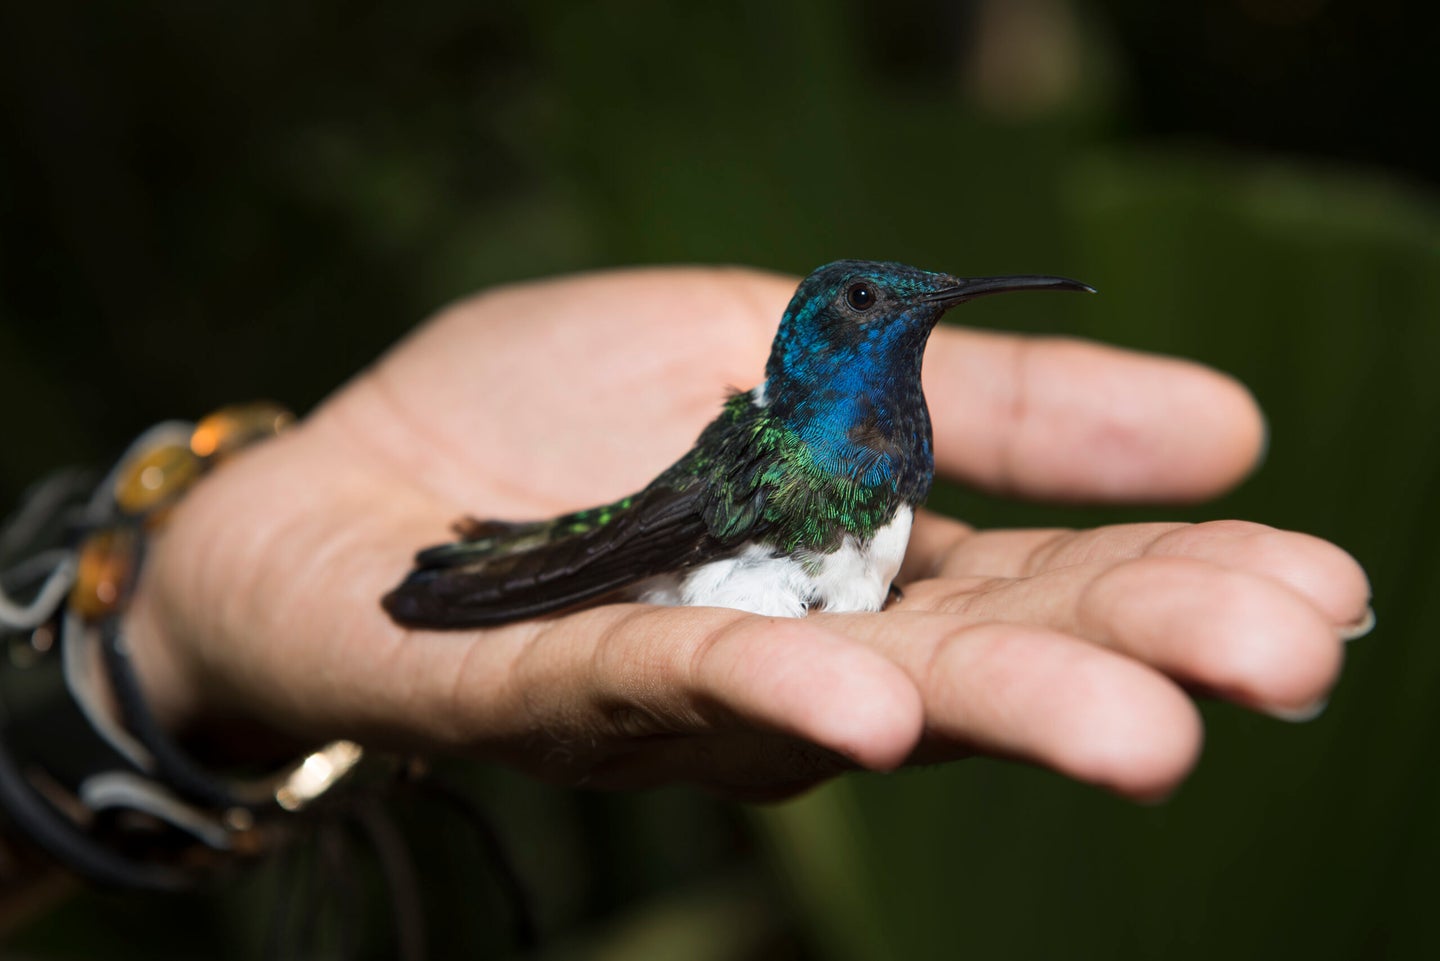 This female hummingbird has taken on the bright blue coloring of her male counterparts.